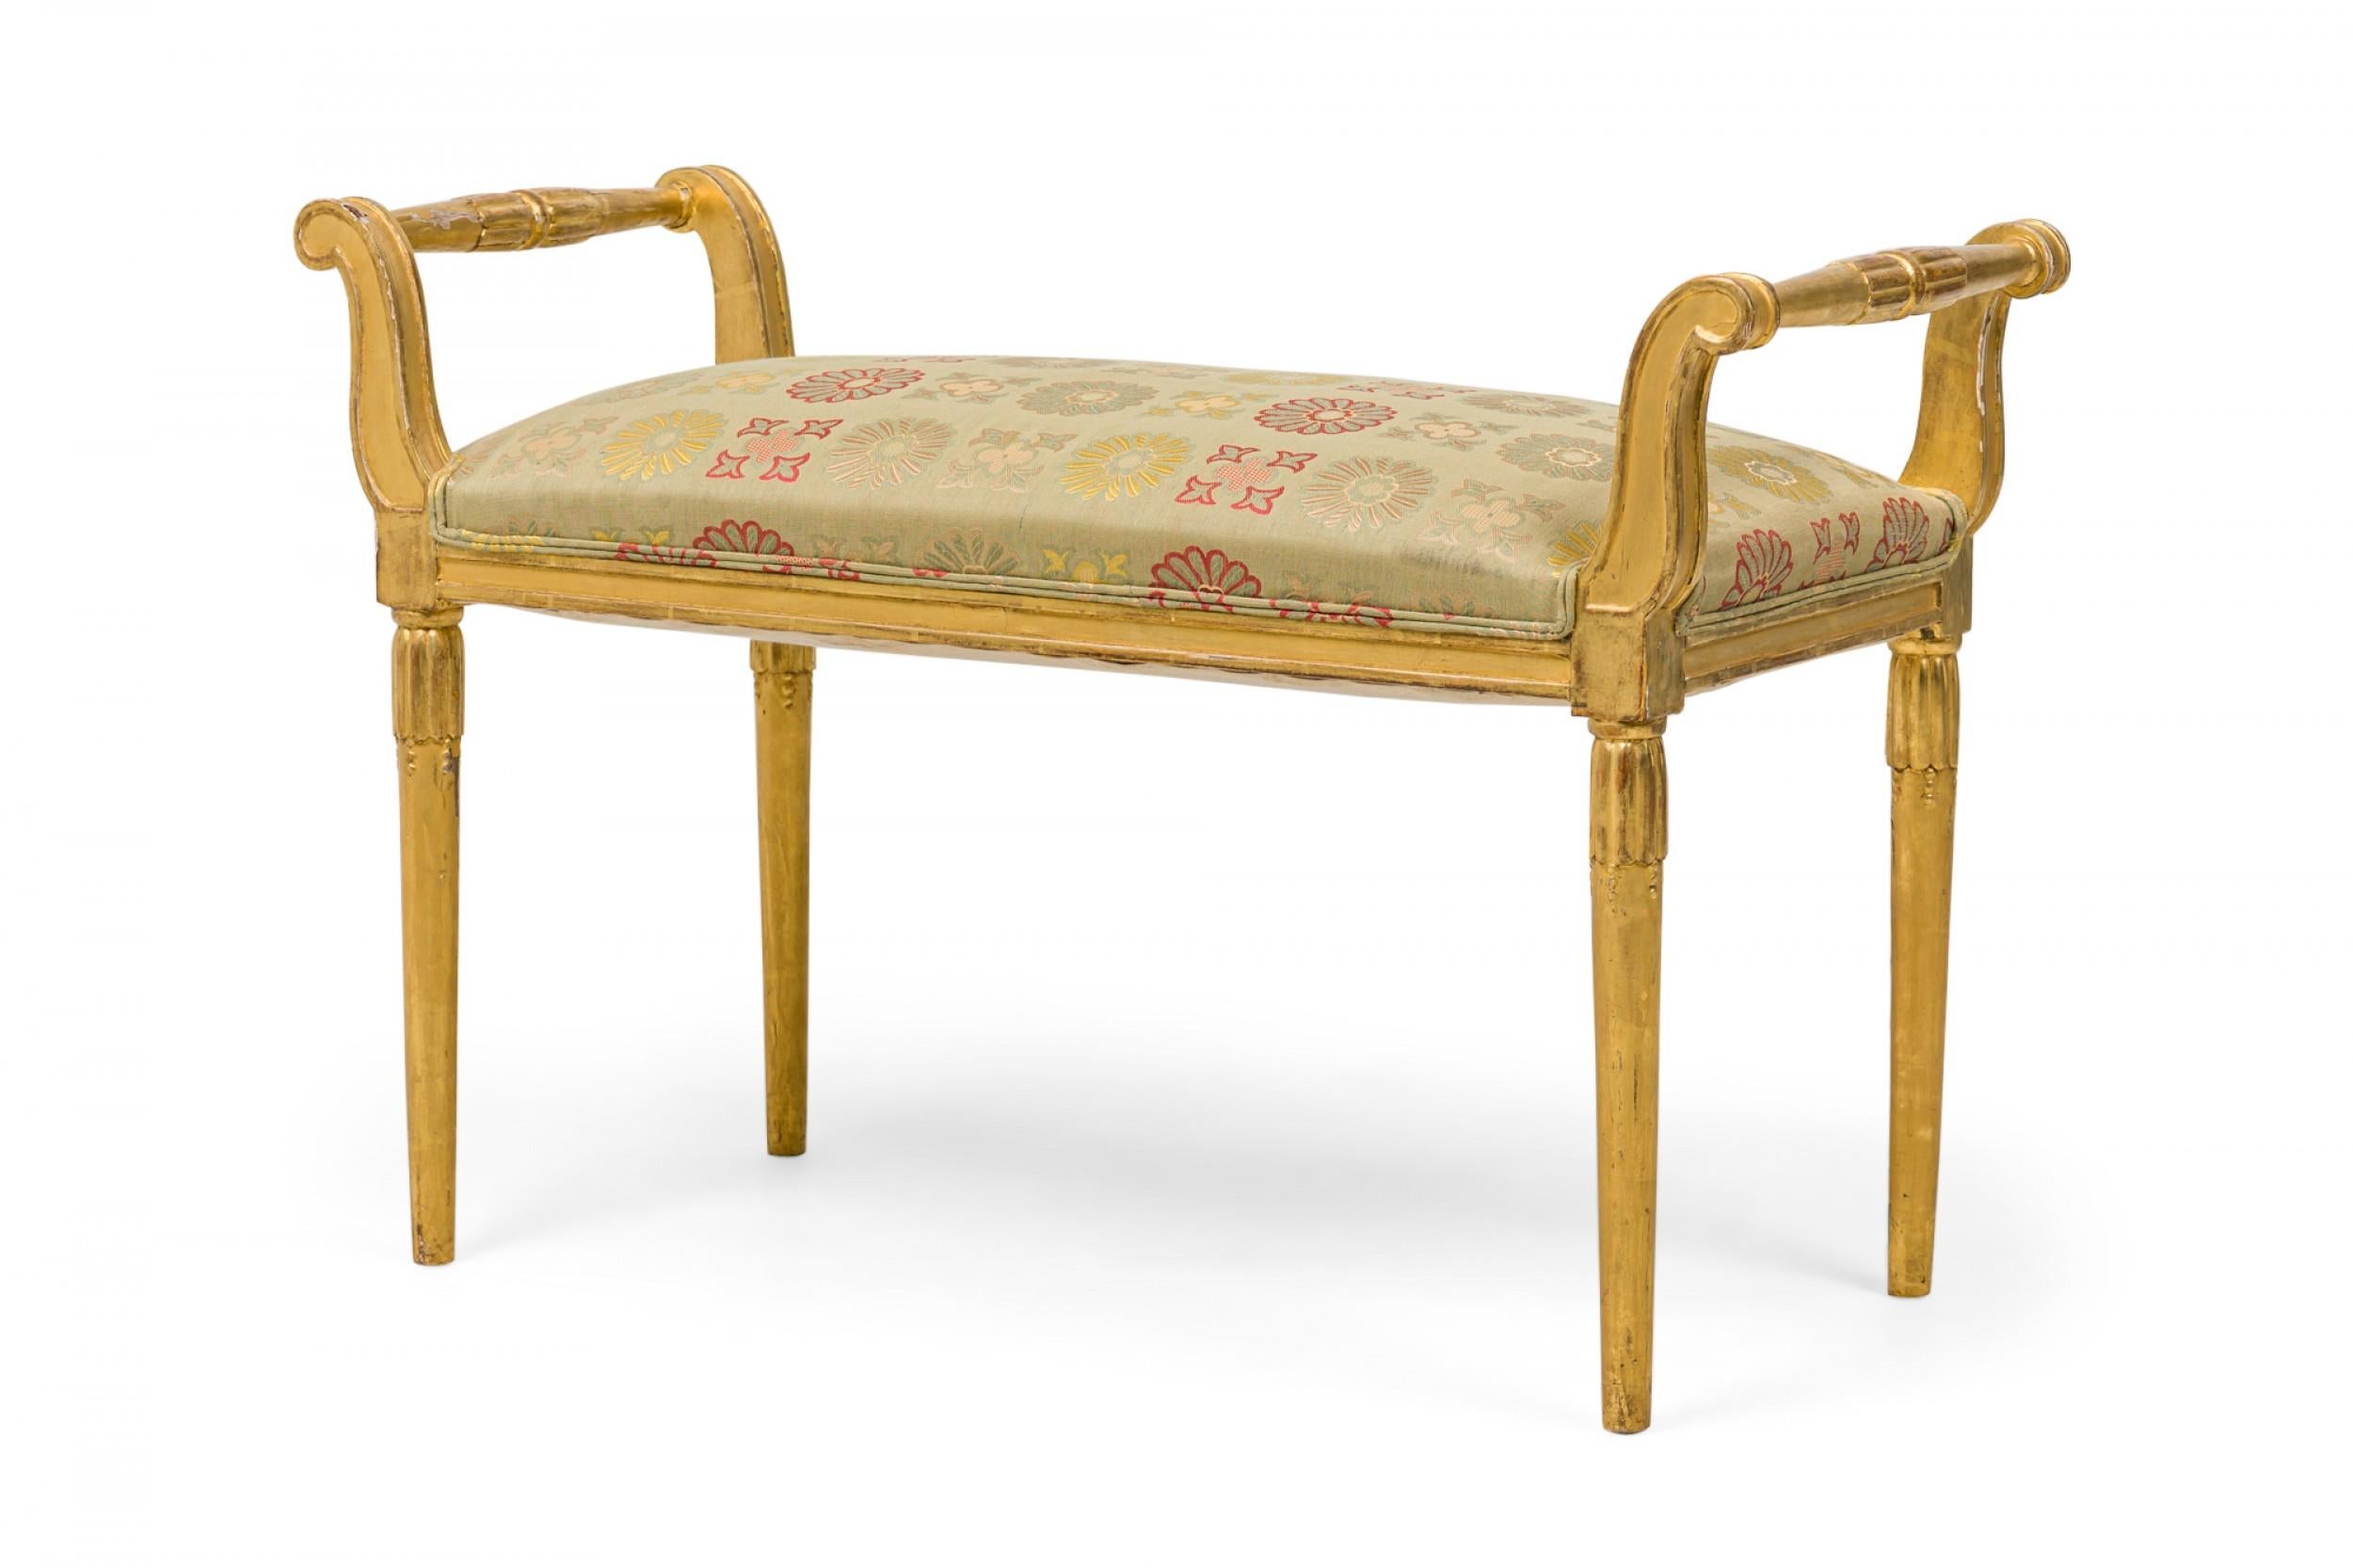 French Art Deco (Early 20th Century) giltwood rectangular bench with outwardly flared scroll form handles, and carved fluted embellishments, the seat padded and upholstered in a pale moss green floral patterned fabric. (SUE ET MARE)